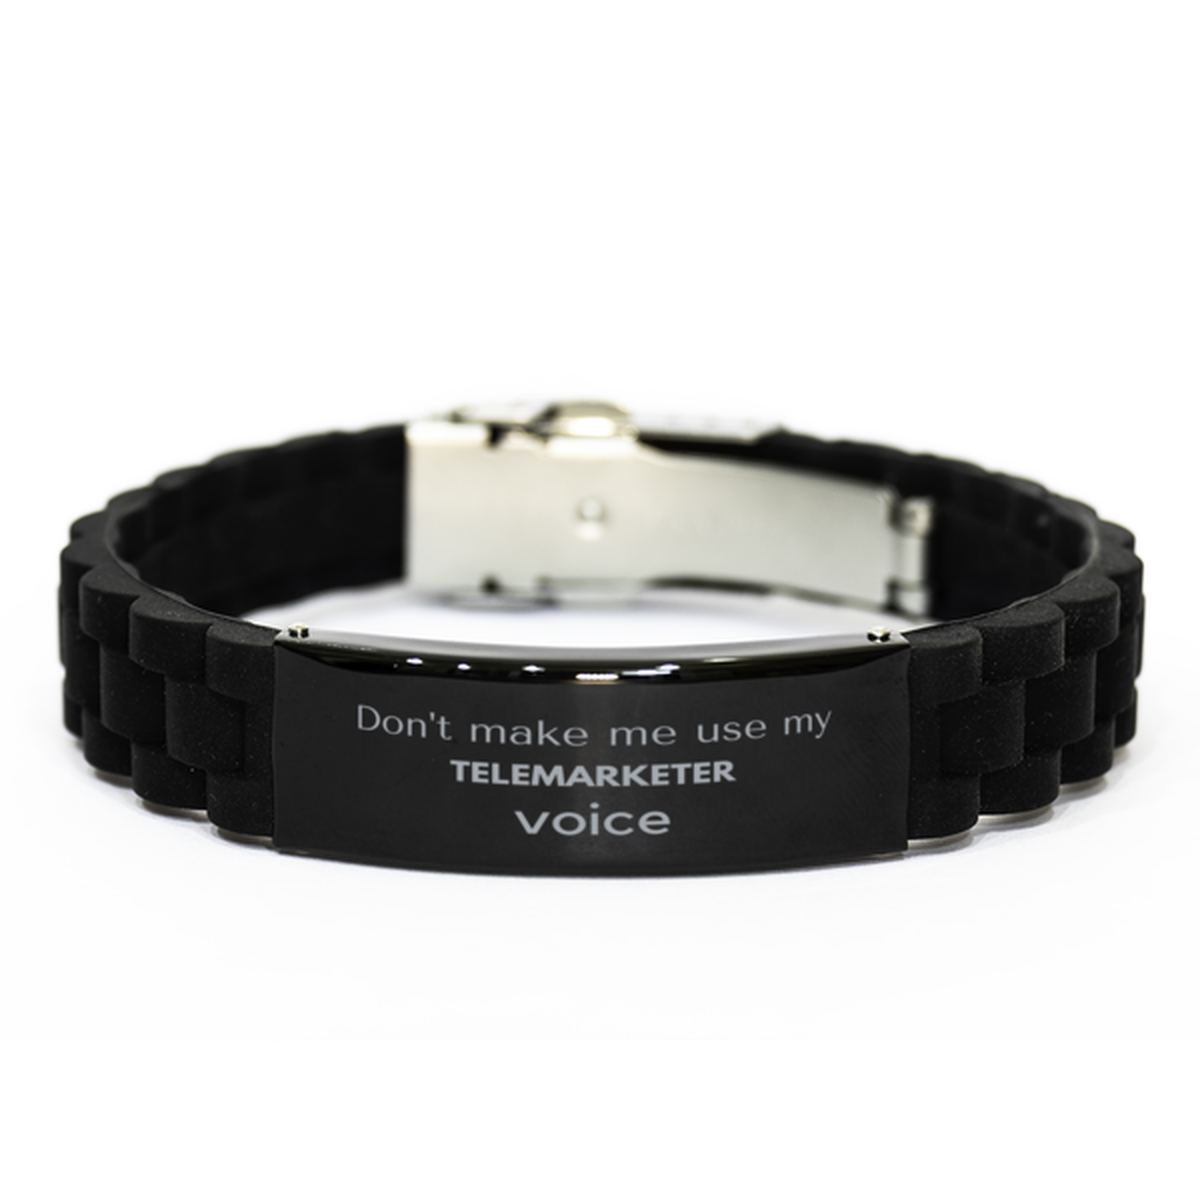 Don't make me use my Telemarketer voice, Sarcasm Telemarketer Gifts, Christmas Telemarketer Black Glidelock Clasp Bracelet Birthday Unique Gifts For Telemarketer Coworkers, Men, Women, Colleague, Friends